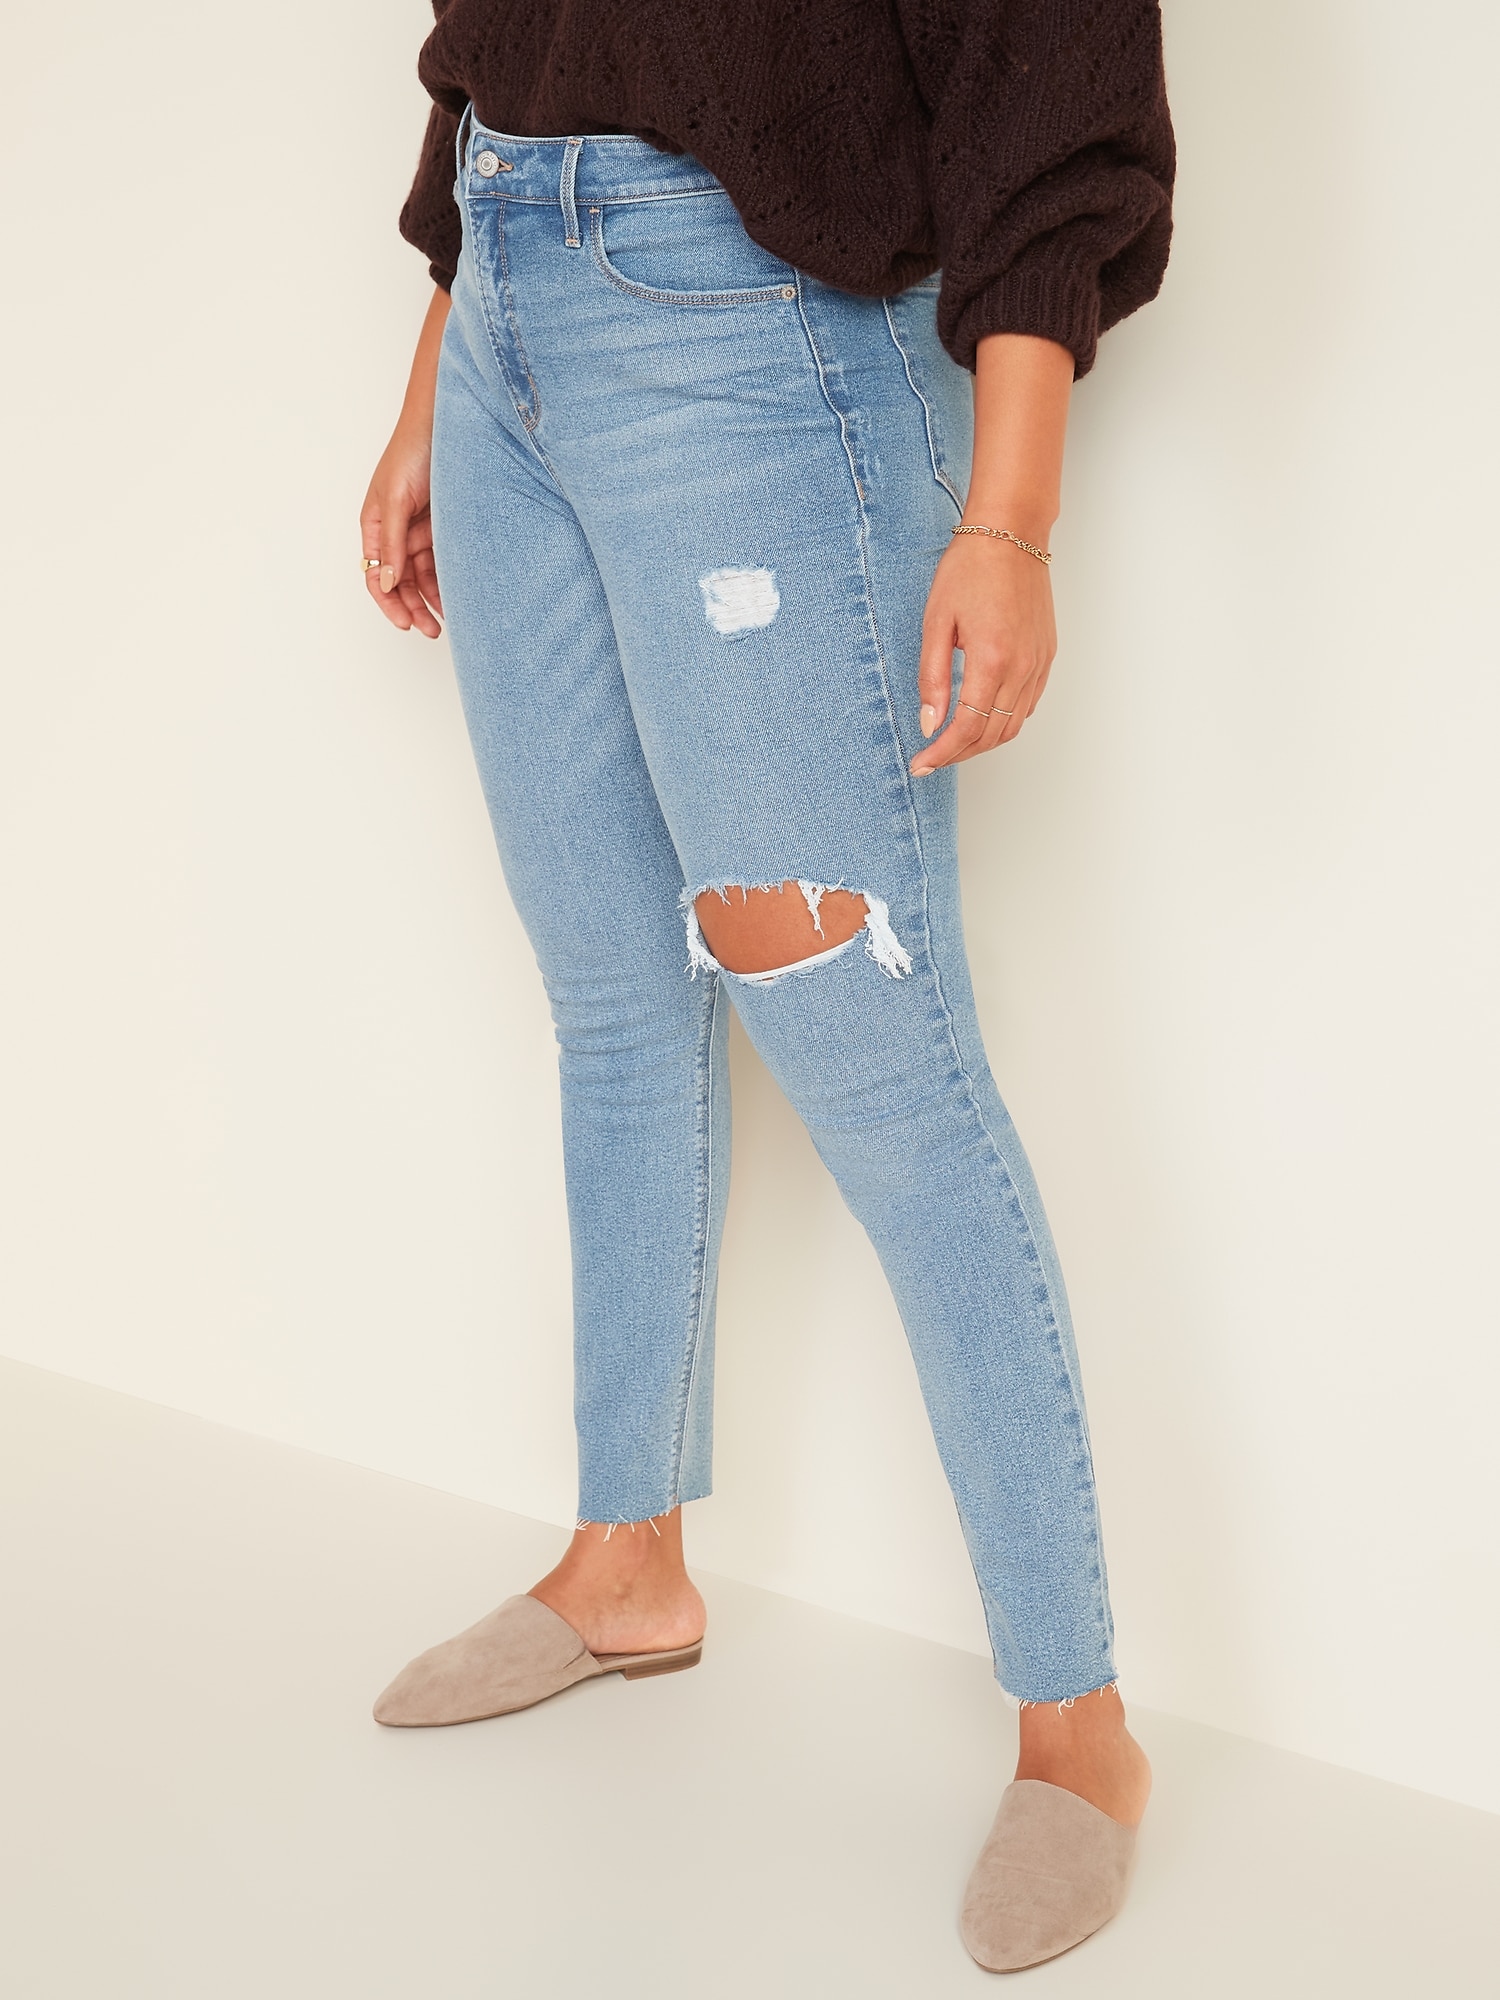 old navy new jeans